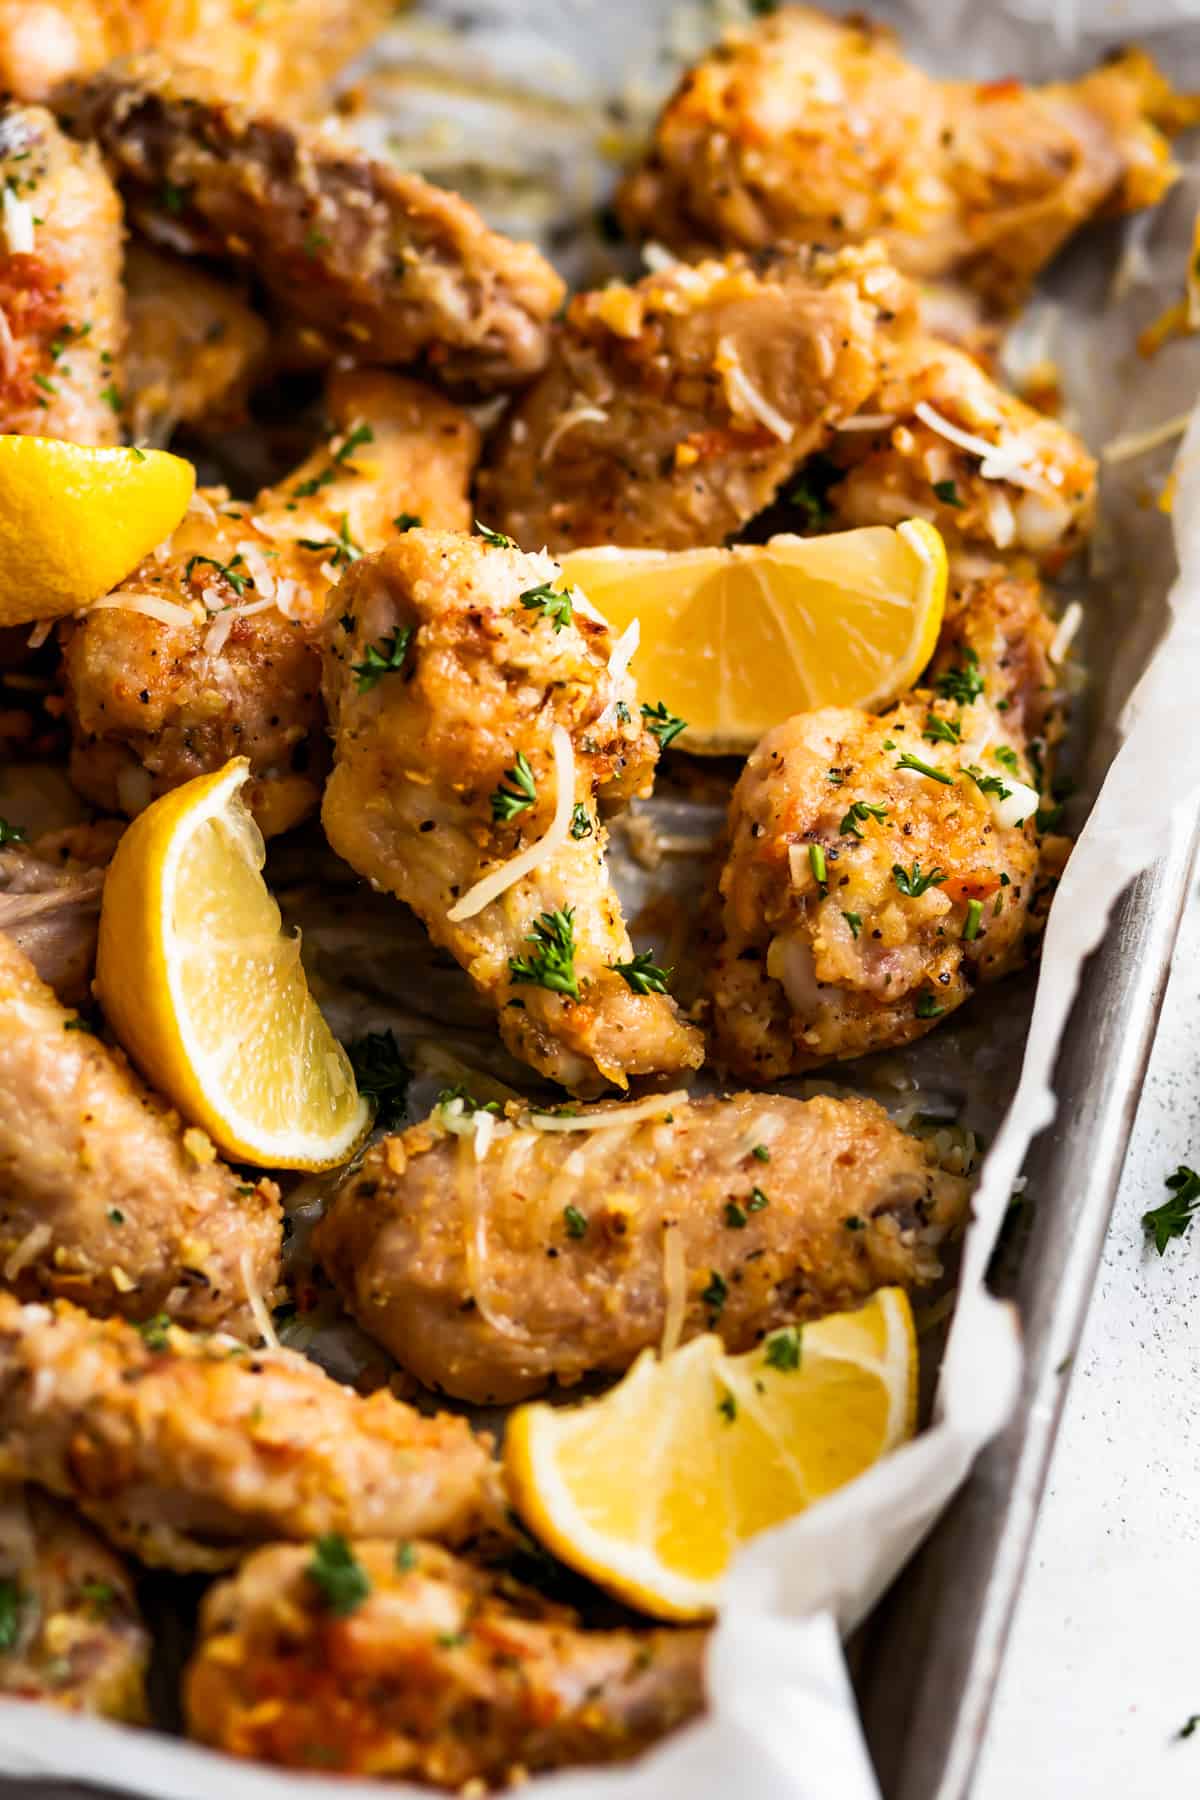 Angled photo of lemon pepper chicken wings, with lemon wedges arranged over the wings.